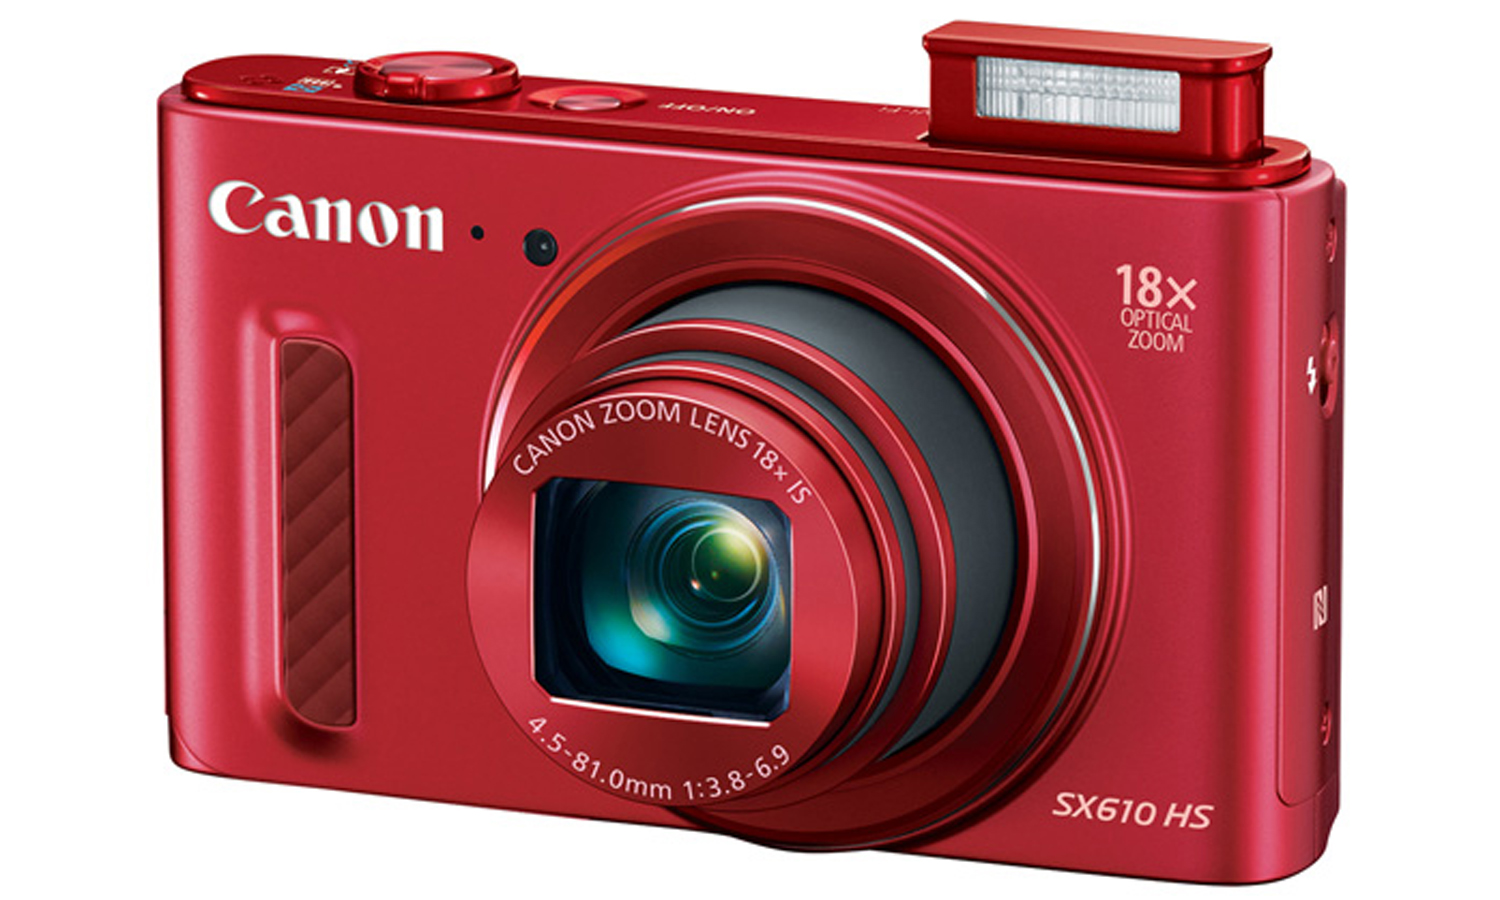 anon PowerShot SX610 HS Review: Easy Video Shooter | Tom's Guide